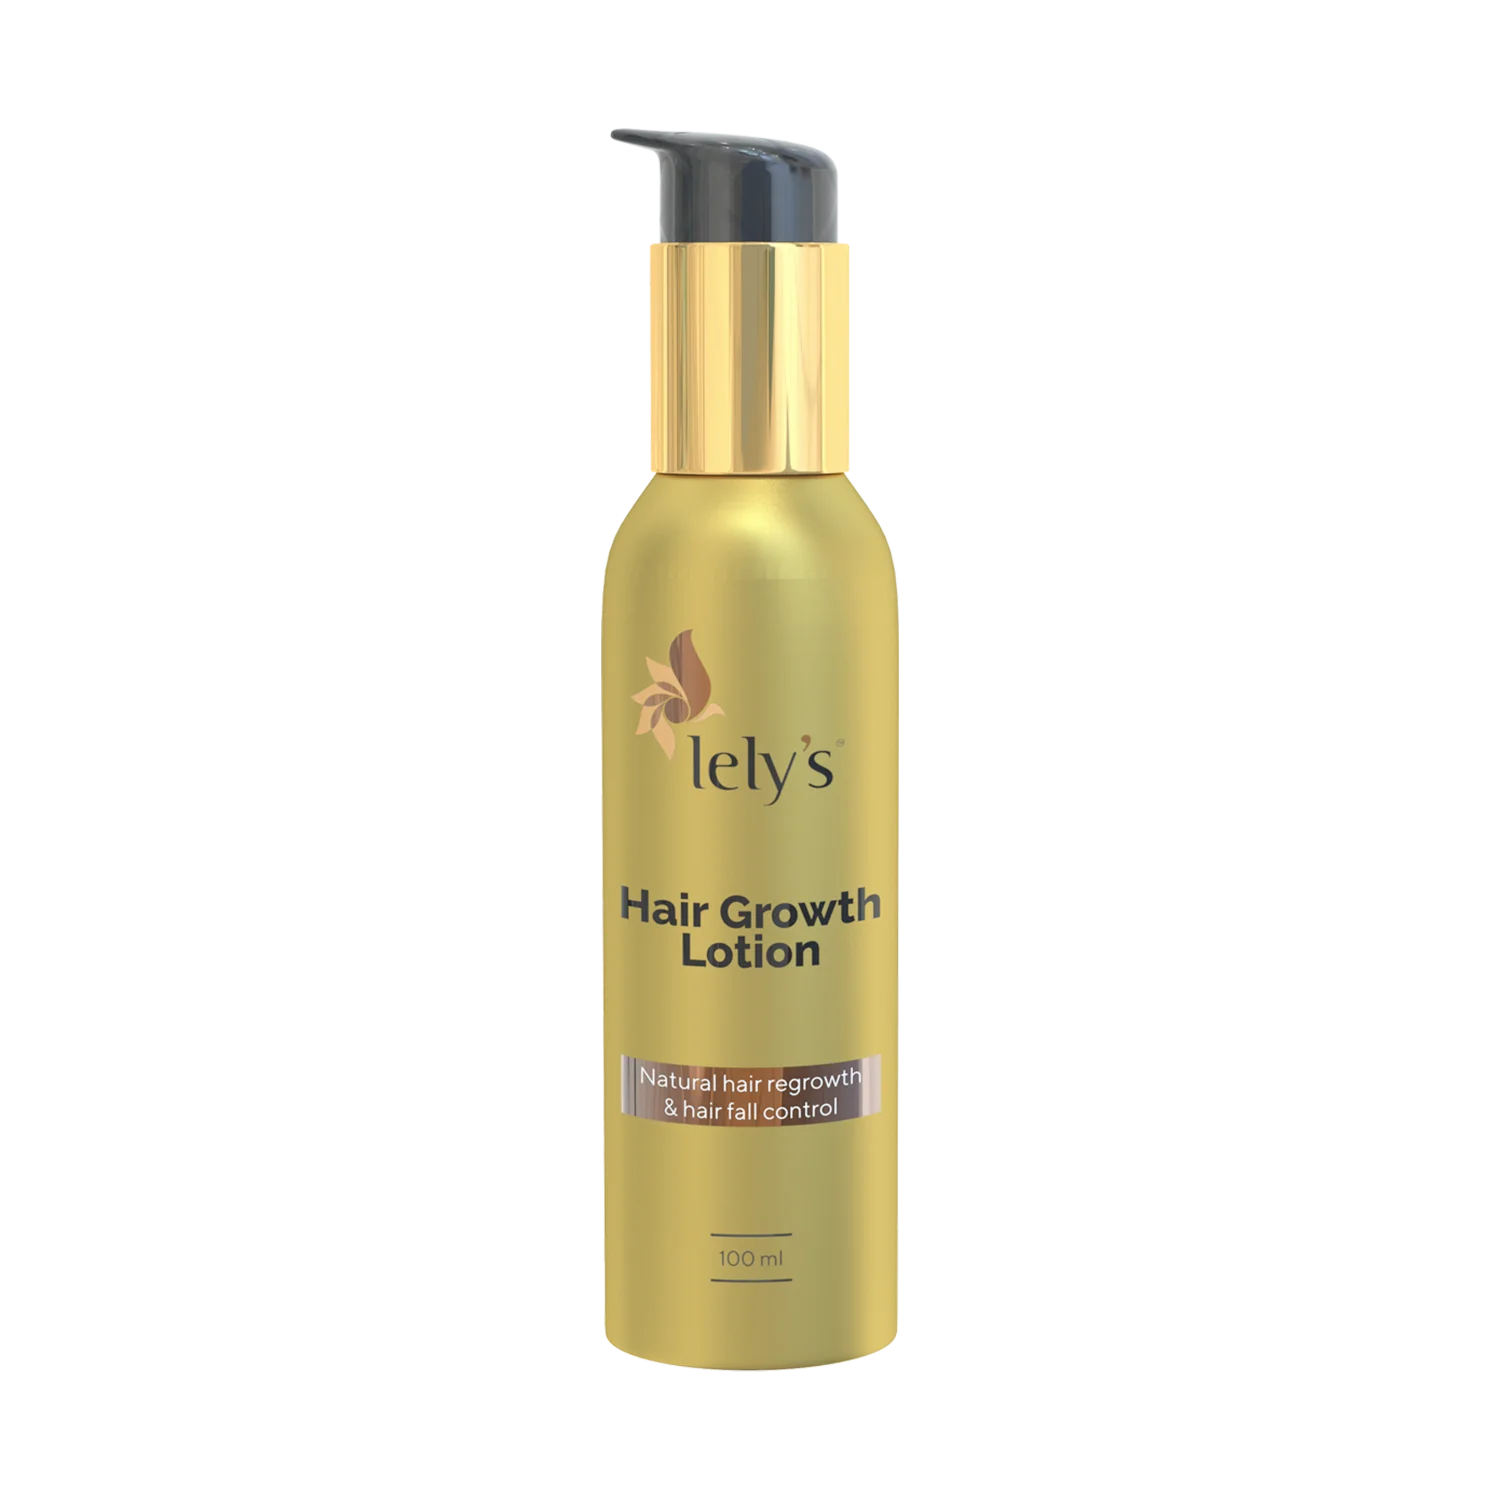 Hair Growth Lotion for men and women